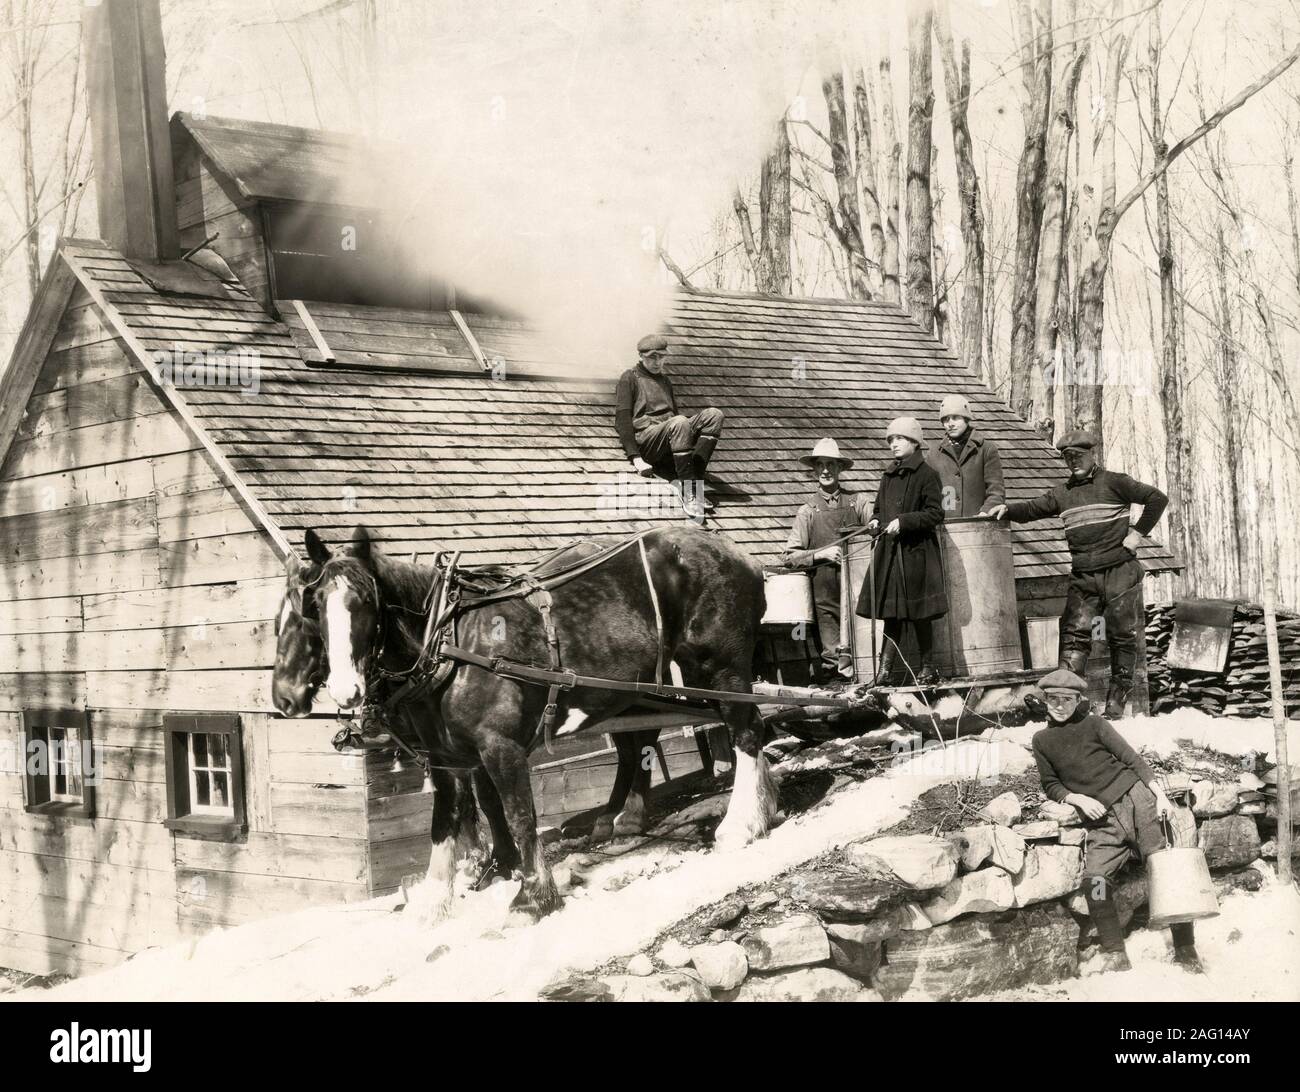 https://c8.alamy.com/comp/2AG14AY/early-20th-century-vintage-press-photograph-making-maple-syrup-on-a-farm-in-canada-in-the-snow-2AG14AY.jpg